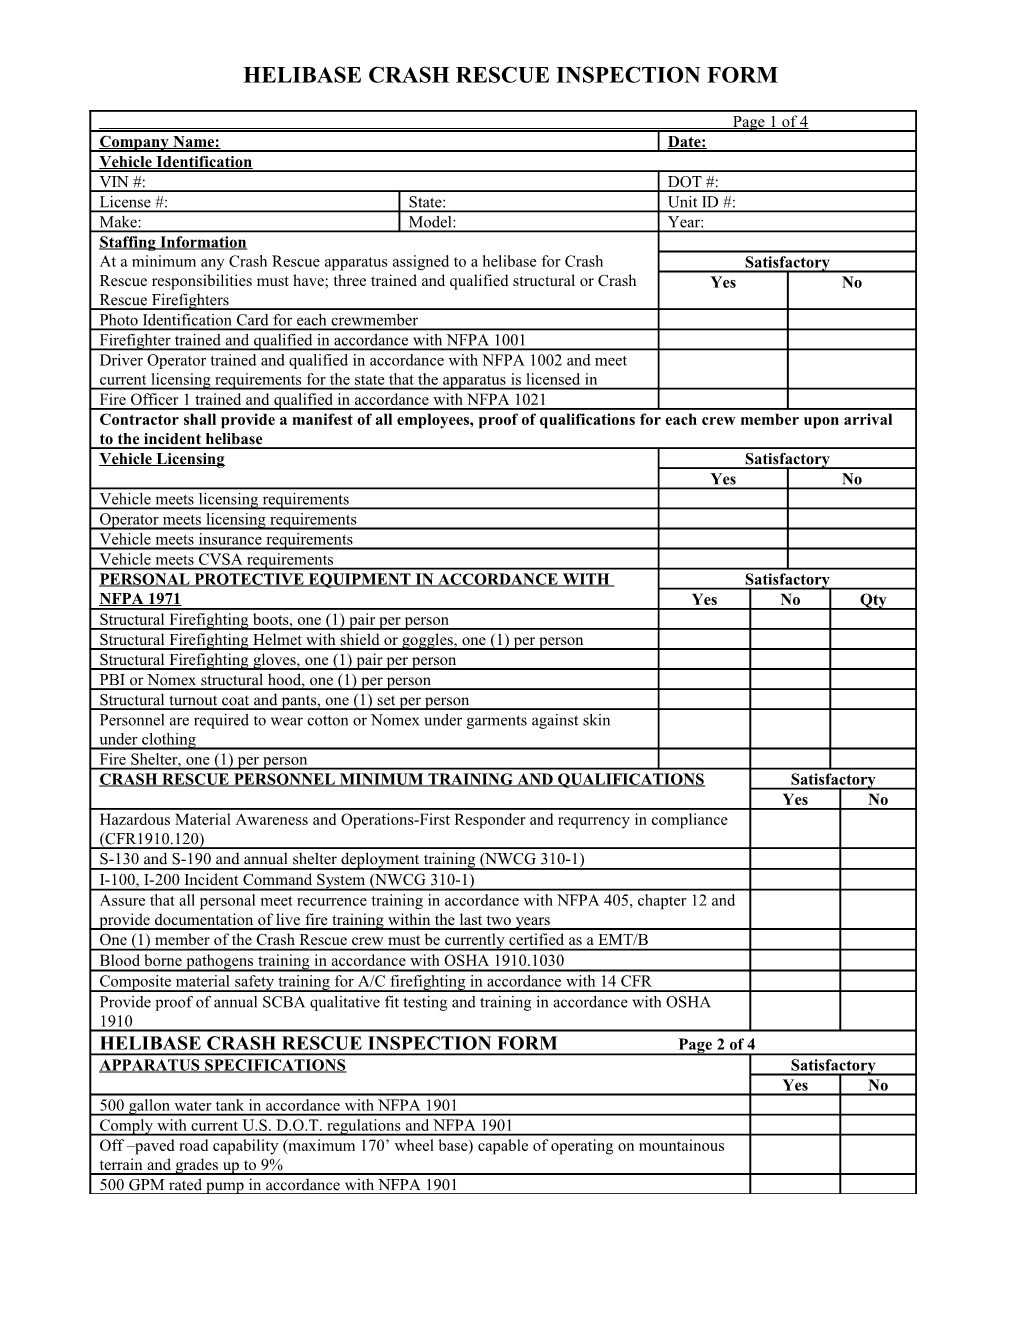 Tactical Water Tender Inspection Form